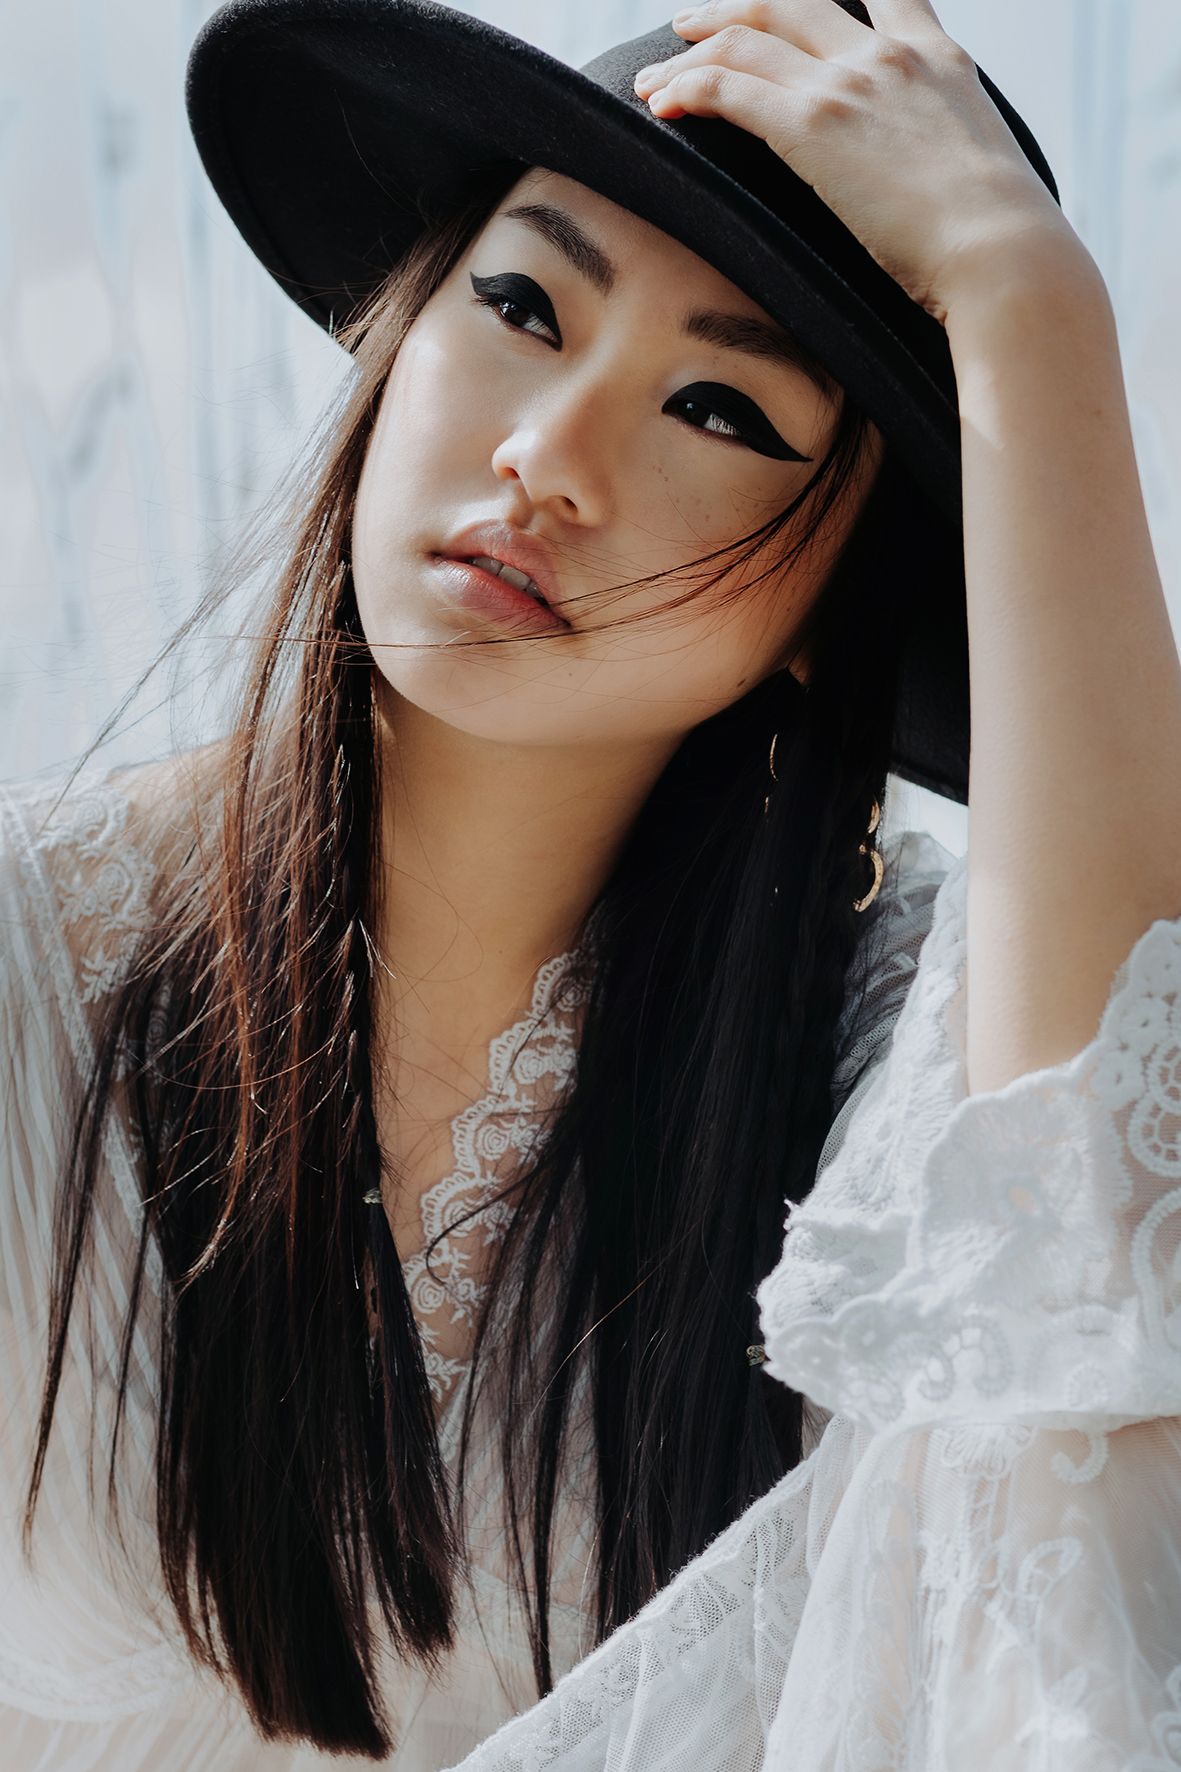 asian young girl with dark long hair and hat sitting near water and holding her hat